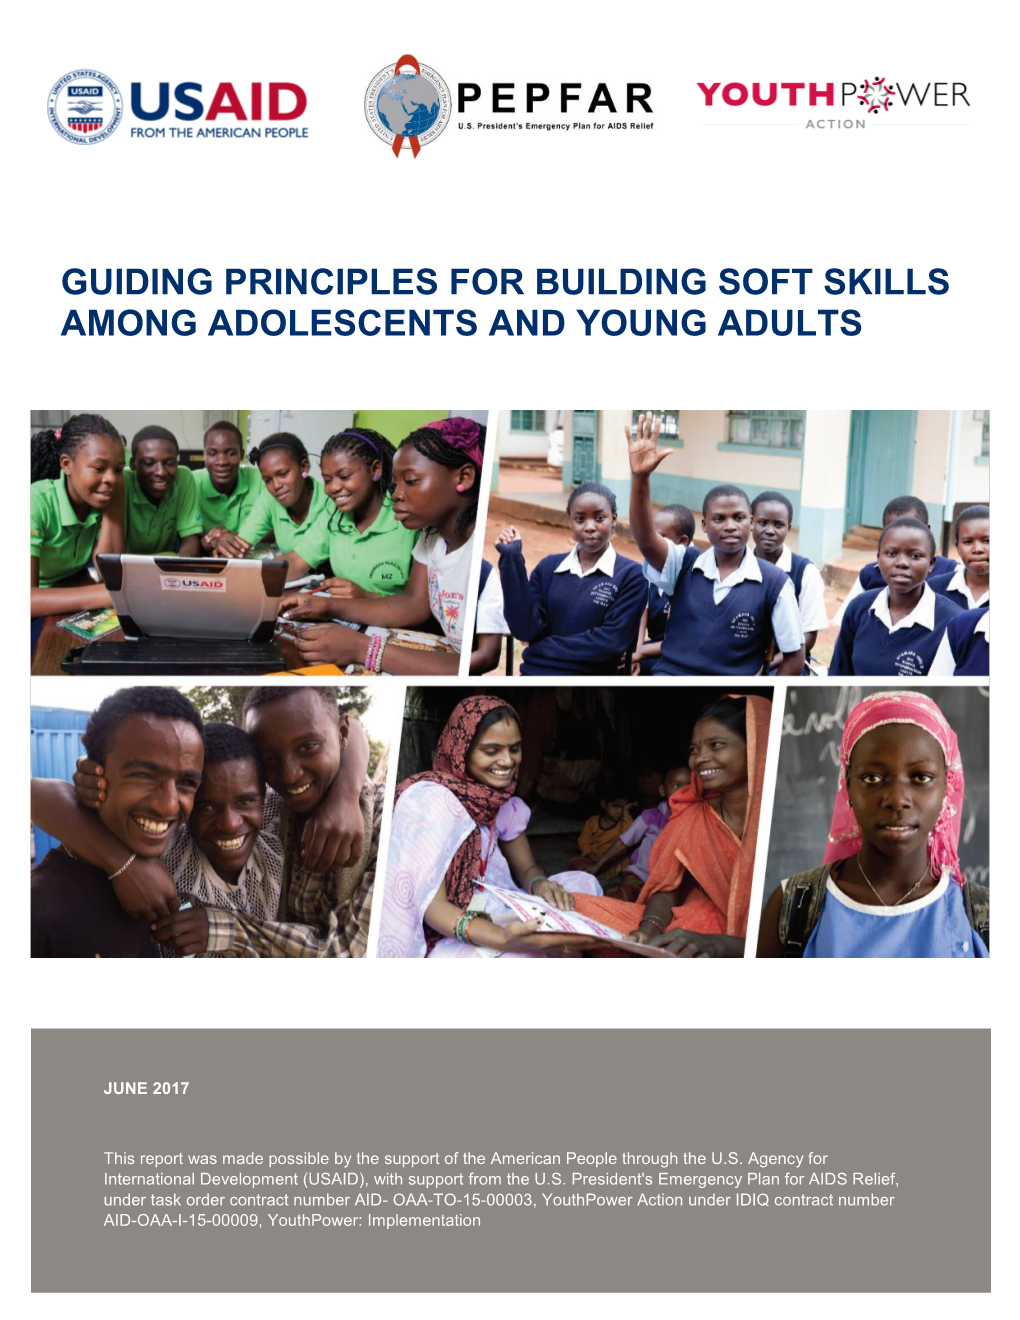 Guiding Principles for Building Soft Skills Among Adolescents and Young Adults